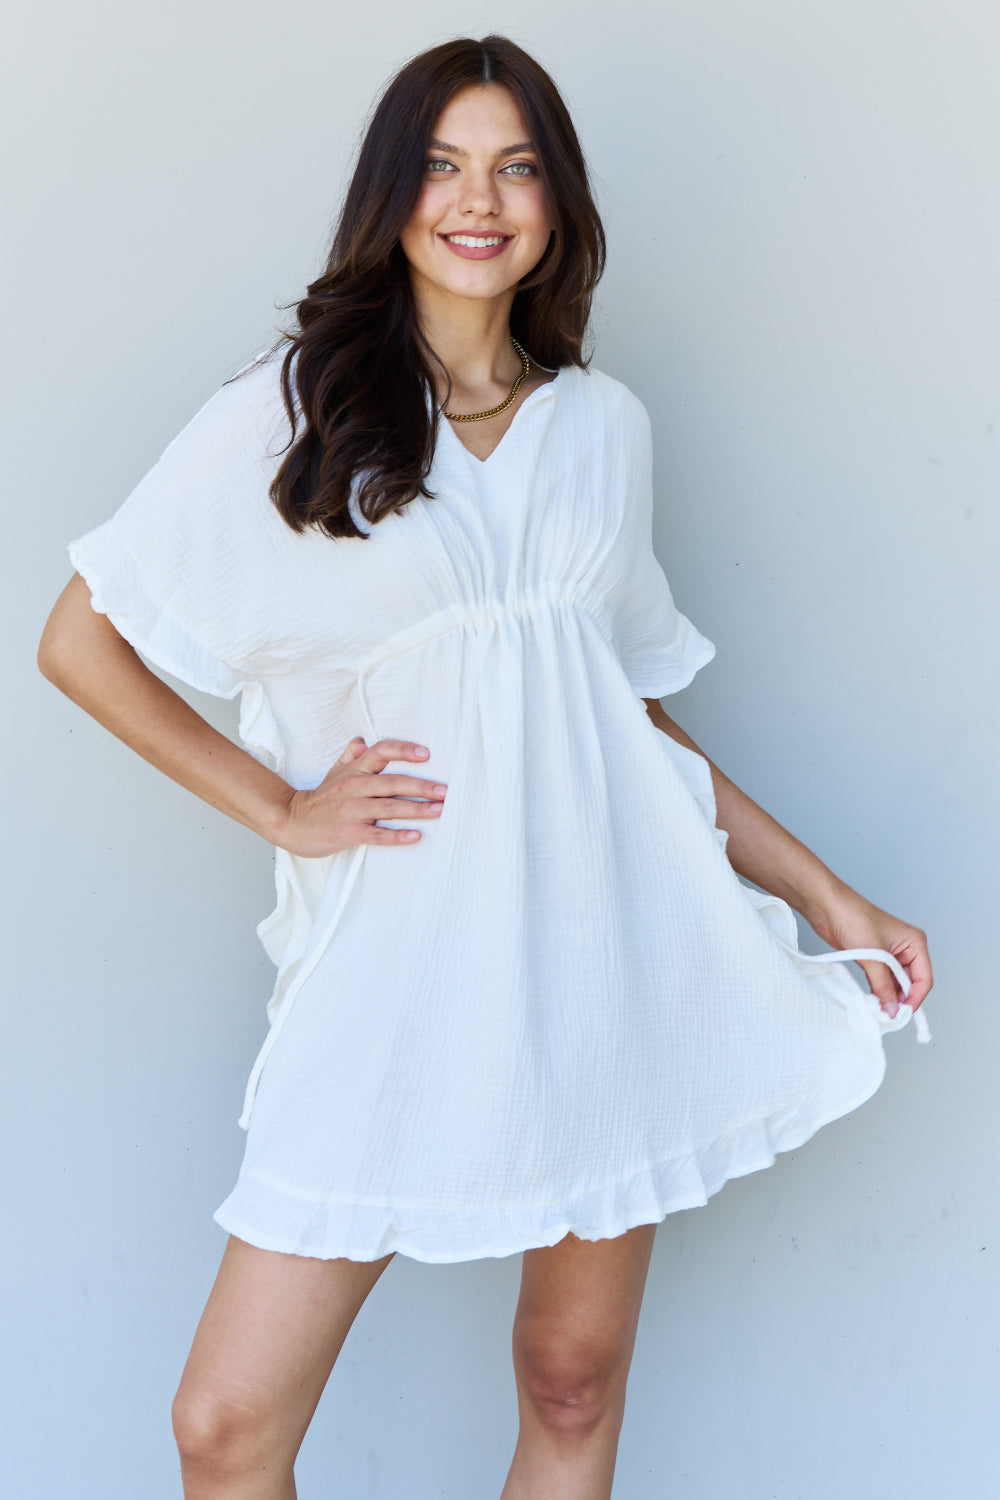 Ninexis Out Of Time Full Size Ruffle Hem Dress with Drawstring Waistband in White - White / S - DRESSES - White